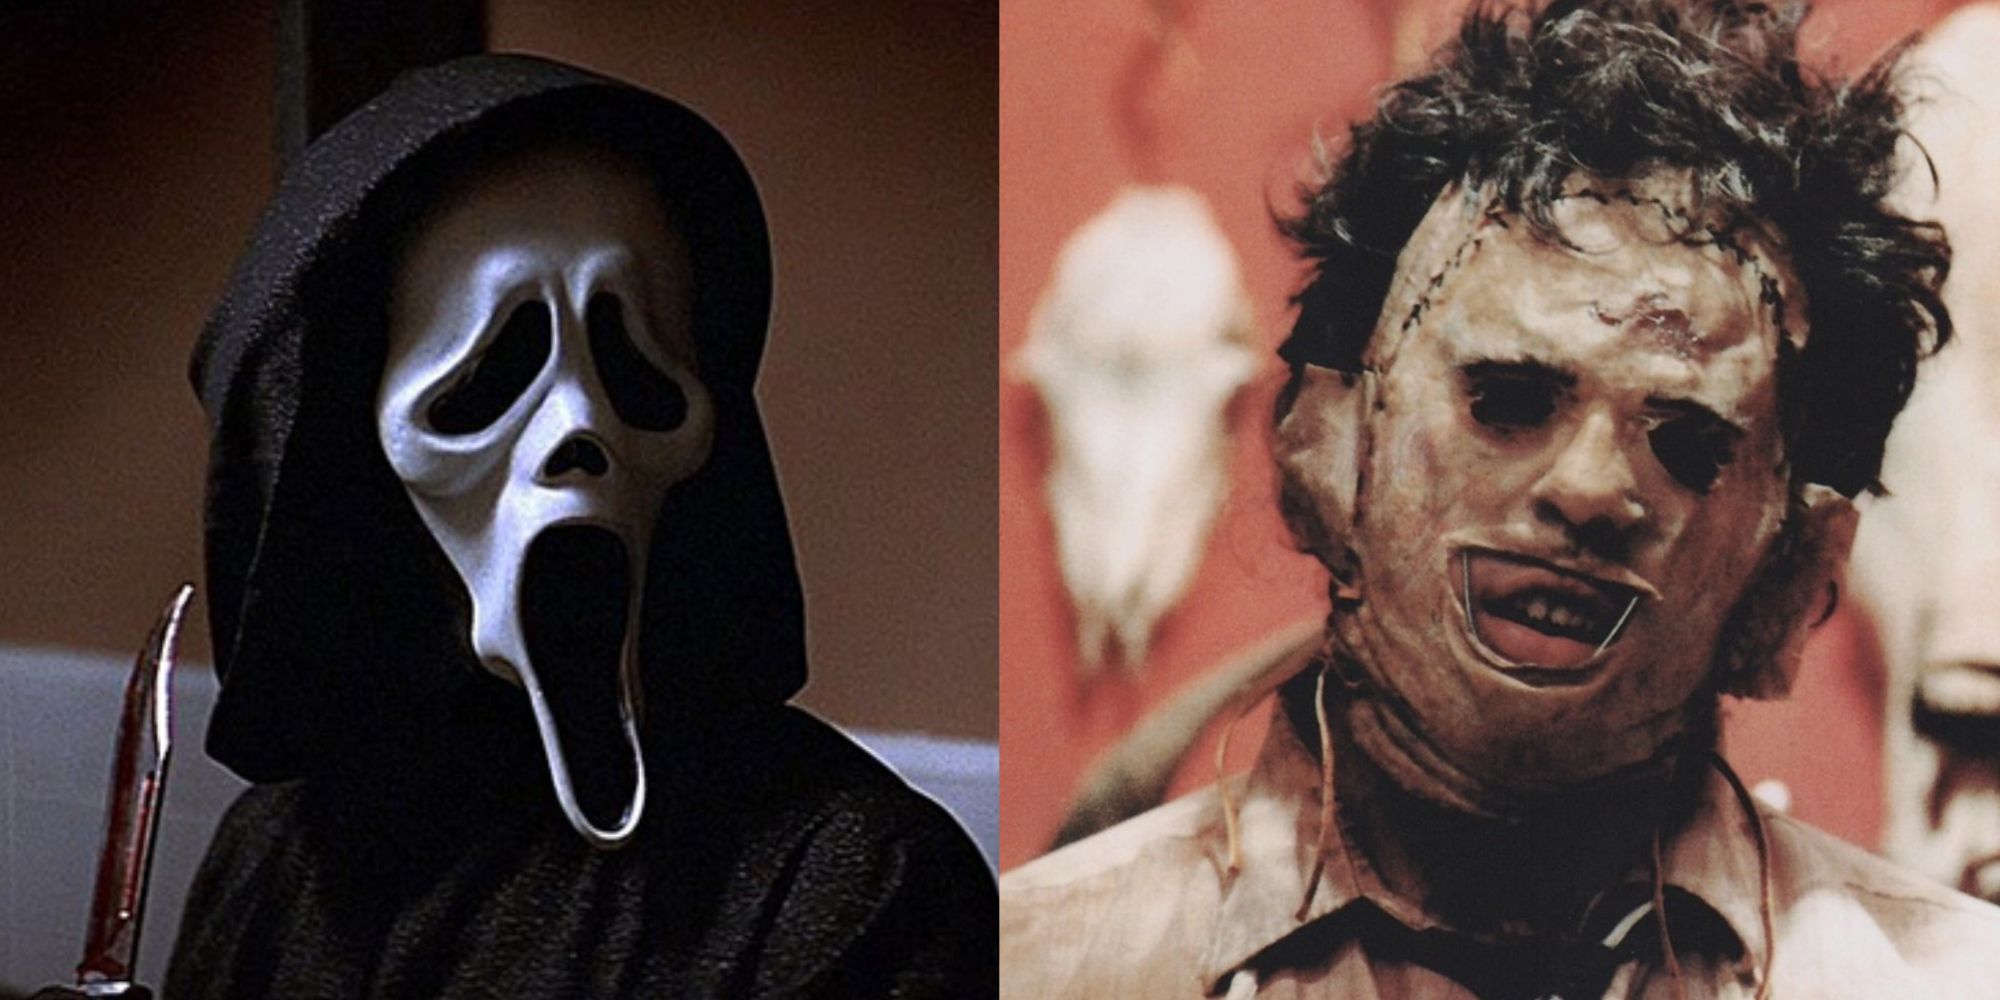 Ghostface and Leatherface